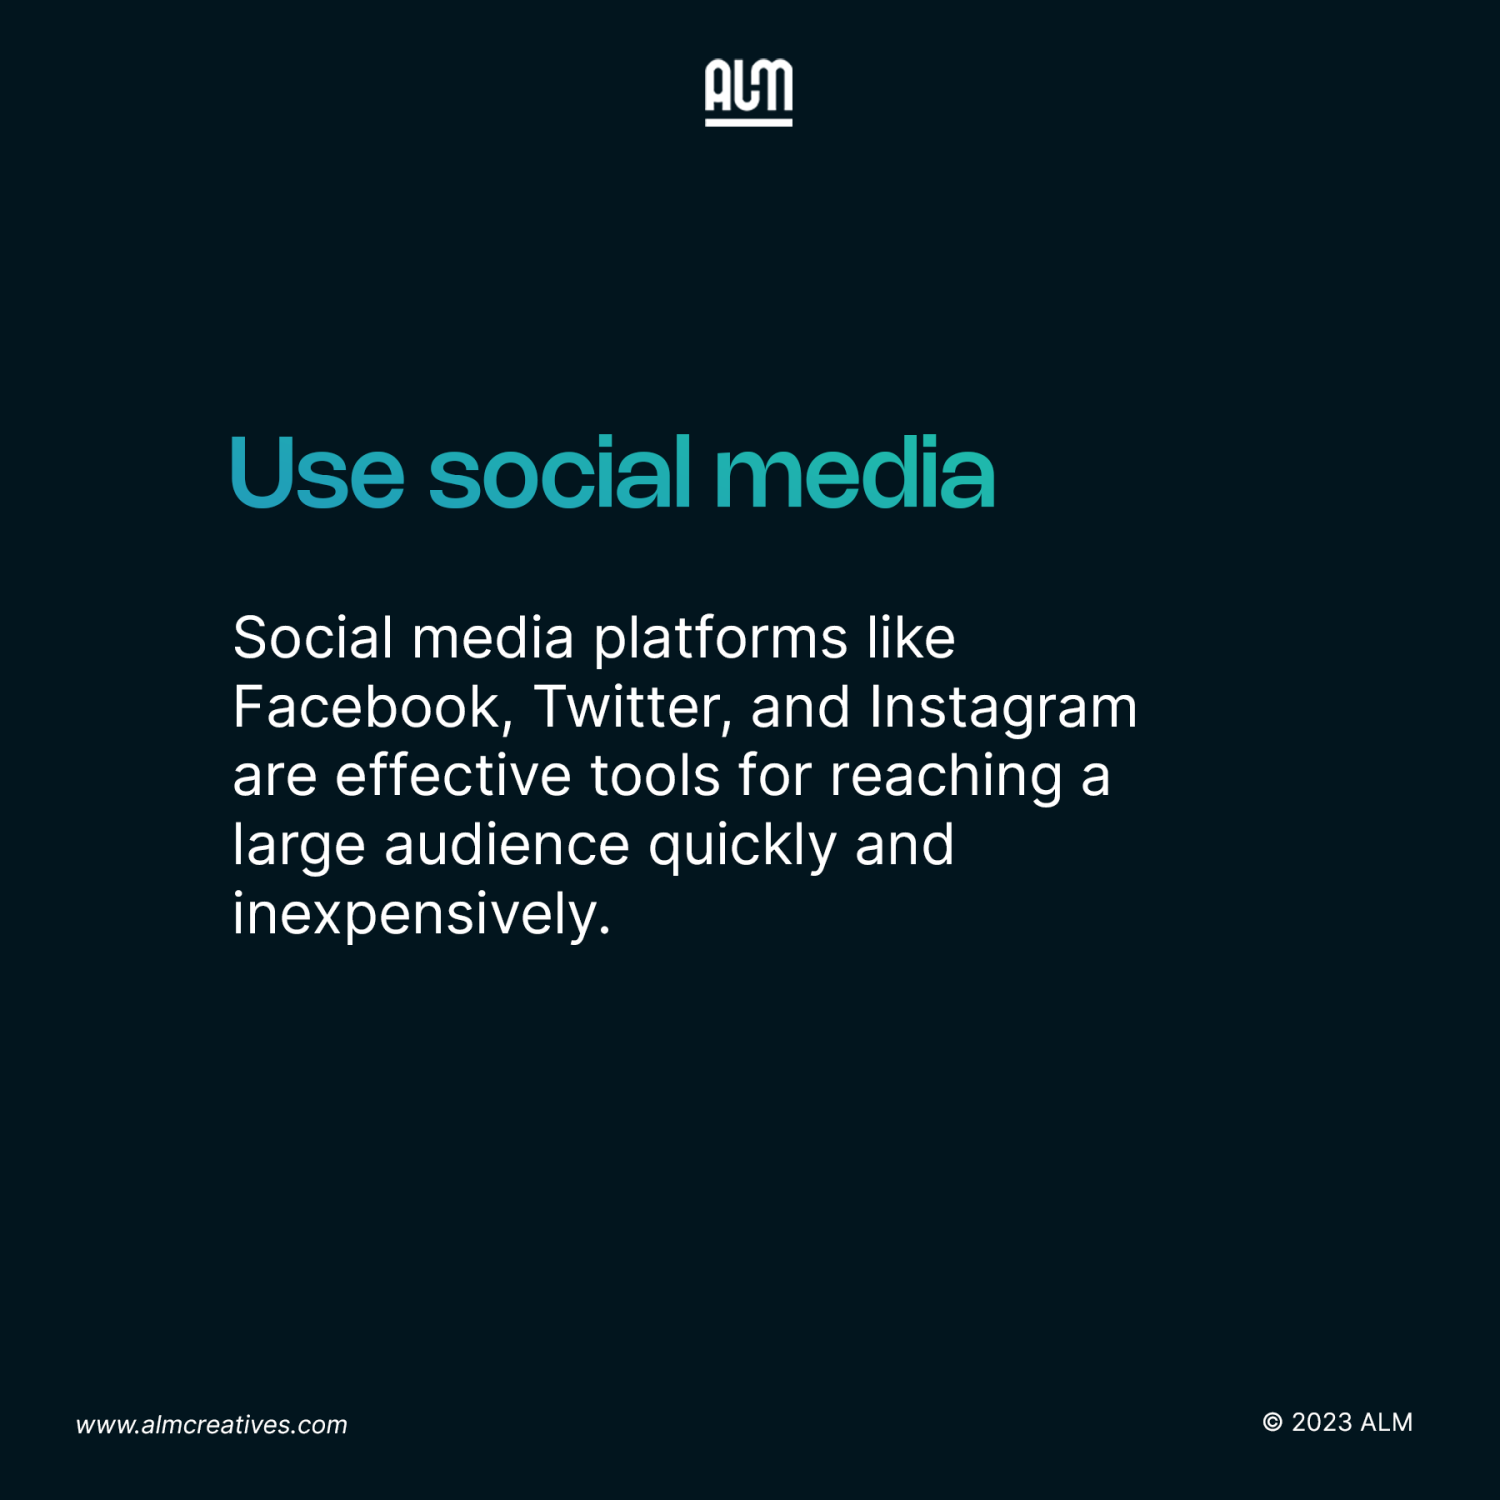 Using social media platforms can help reach a larger audience.